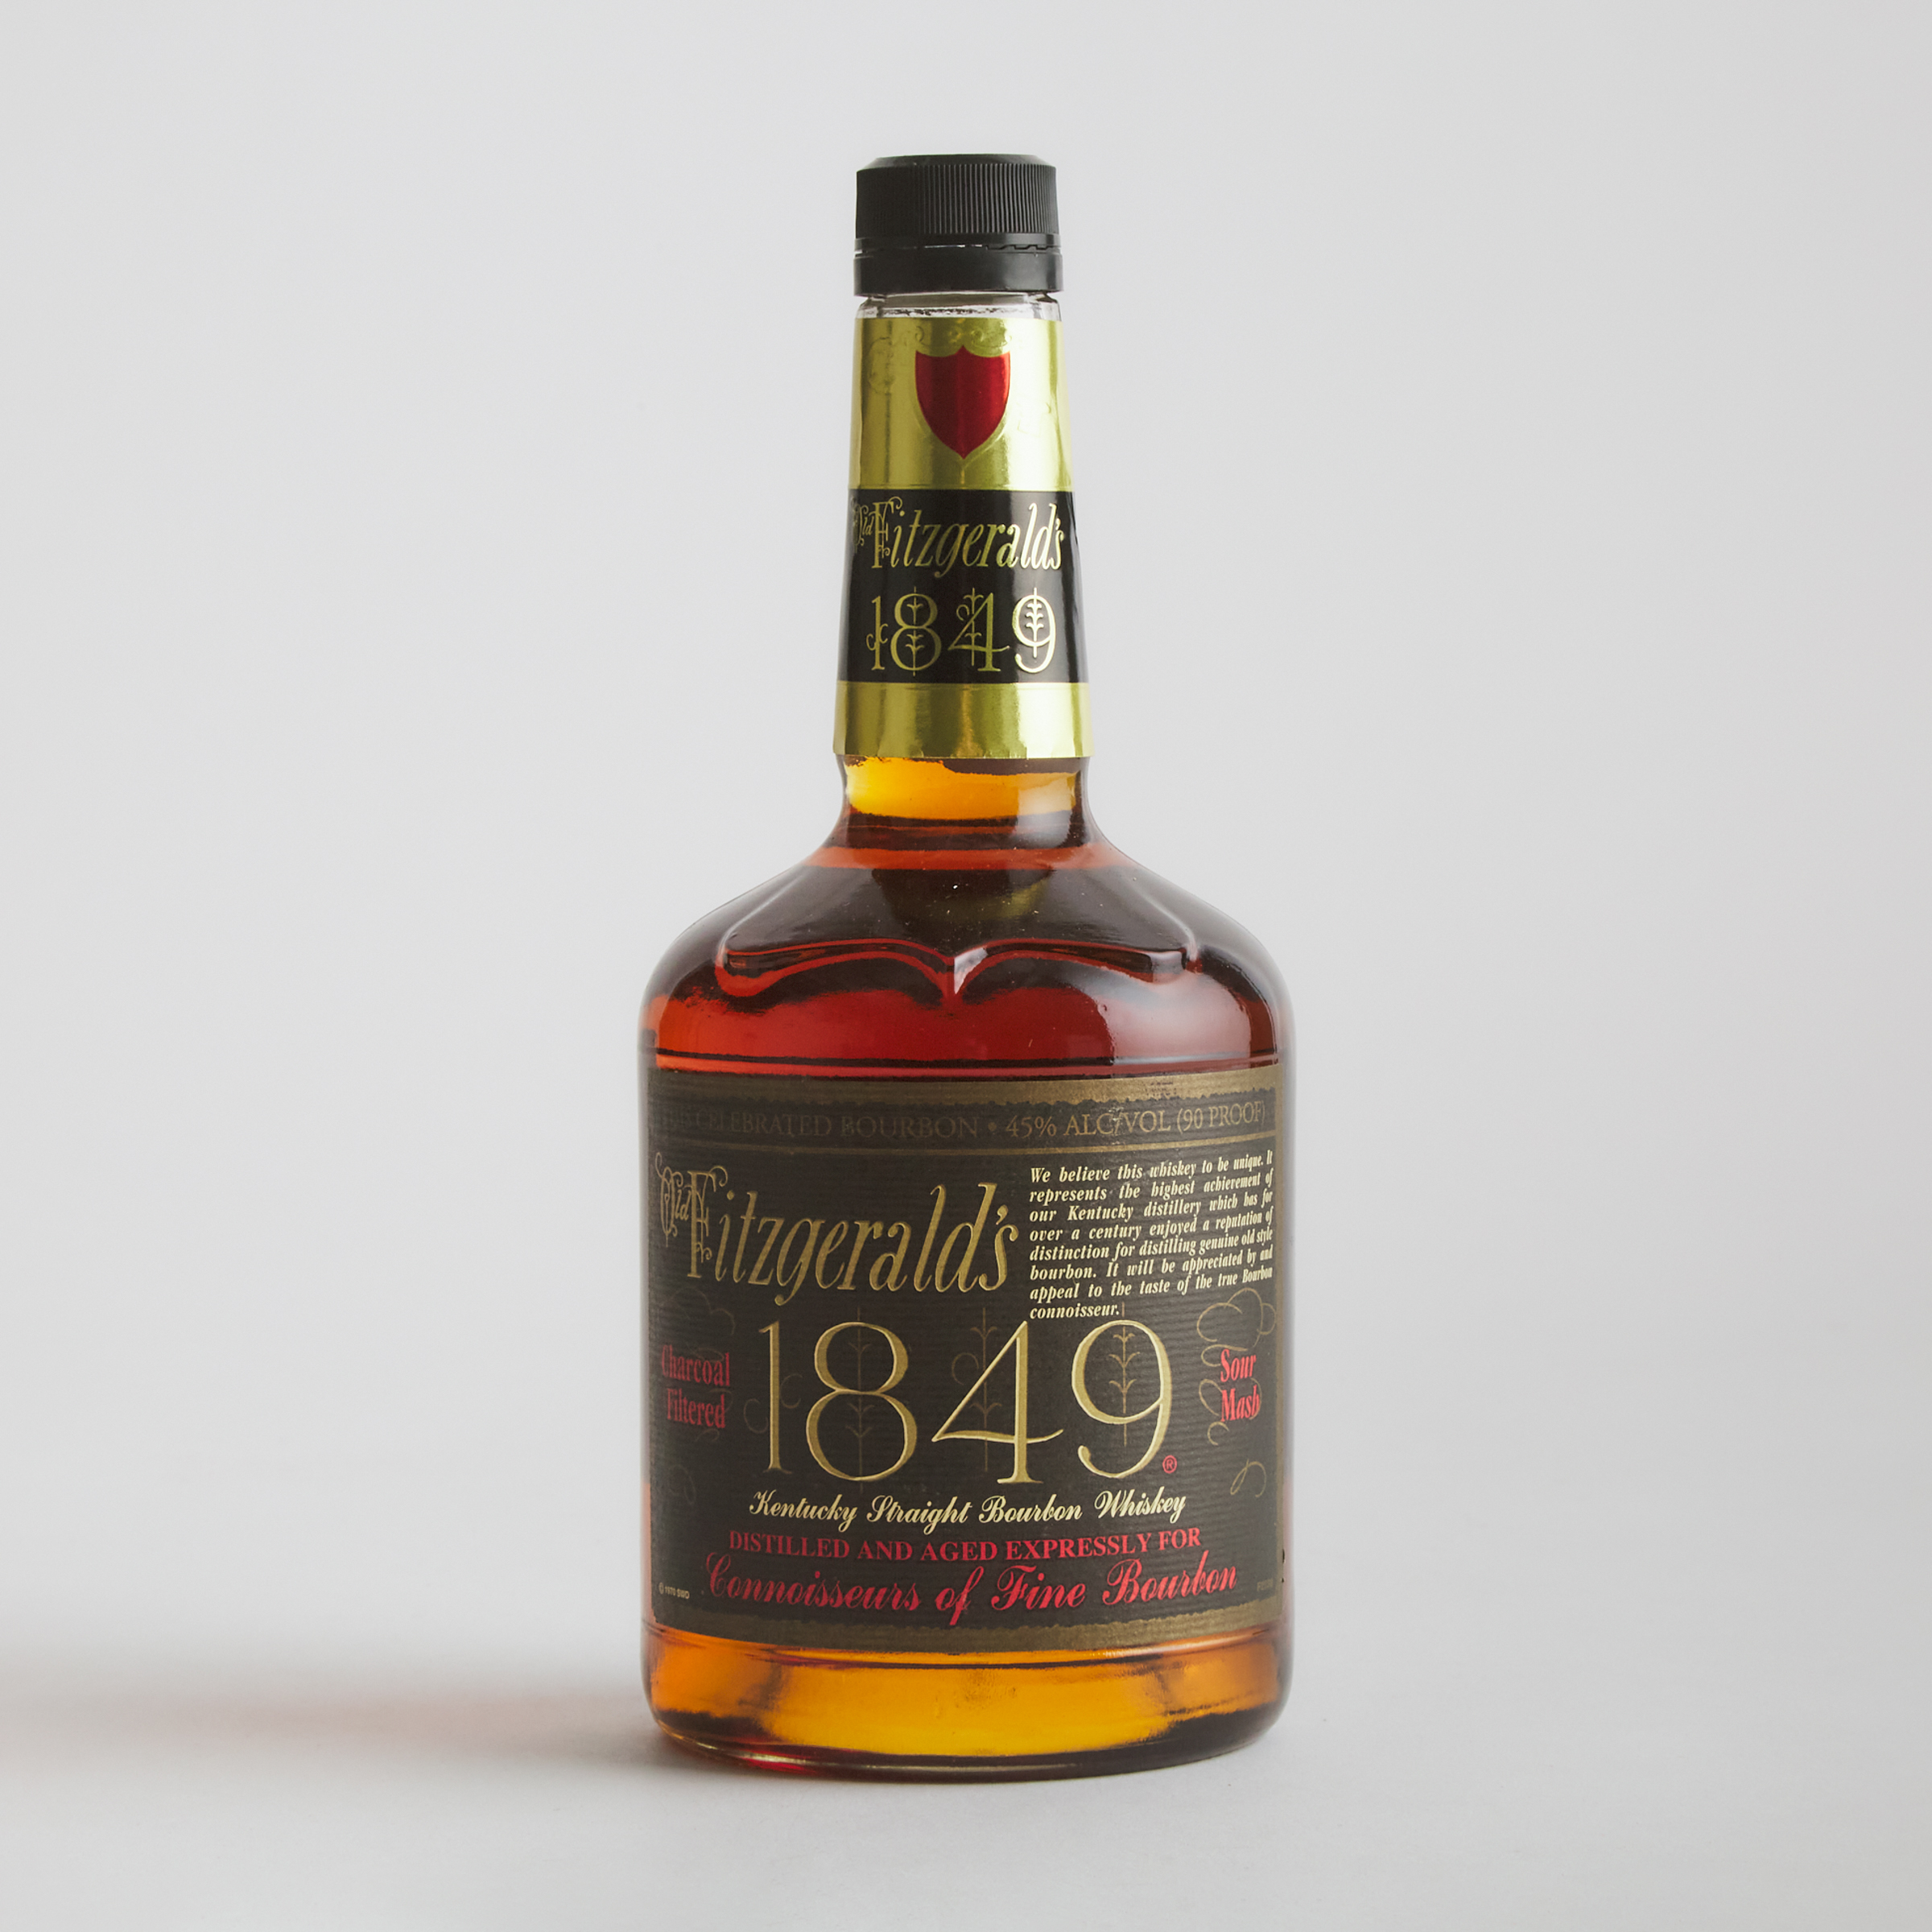 OLD FITZGERALD KENTUCKY STRAIGHT BOURBON WHISKEY (ONE 750 ML)